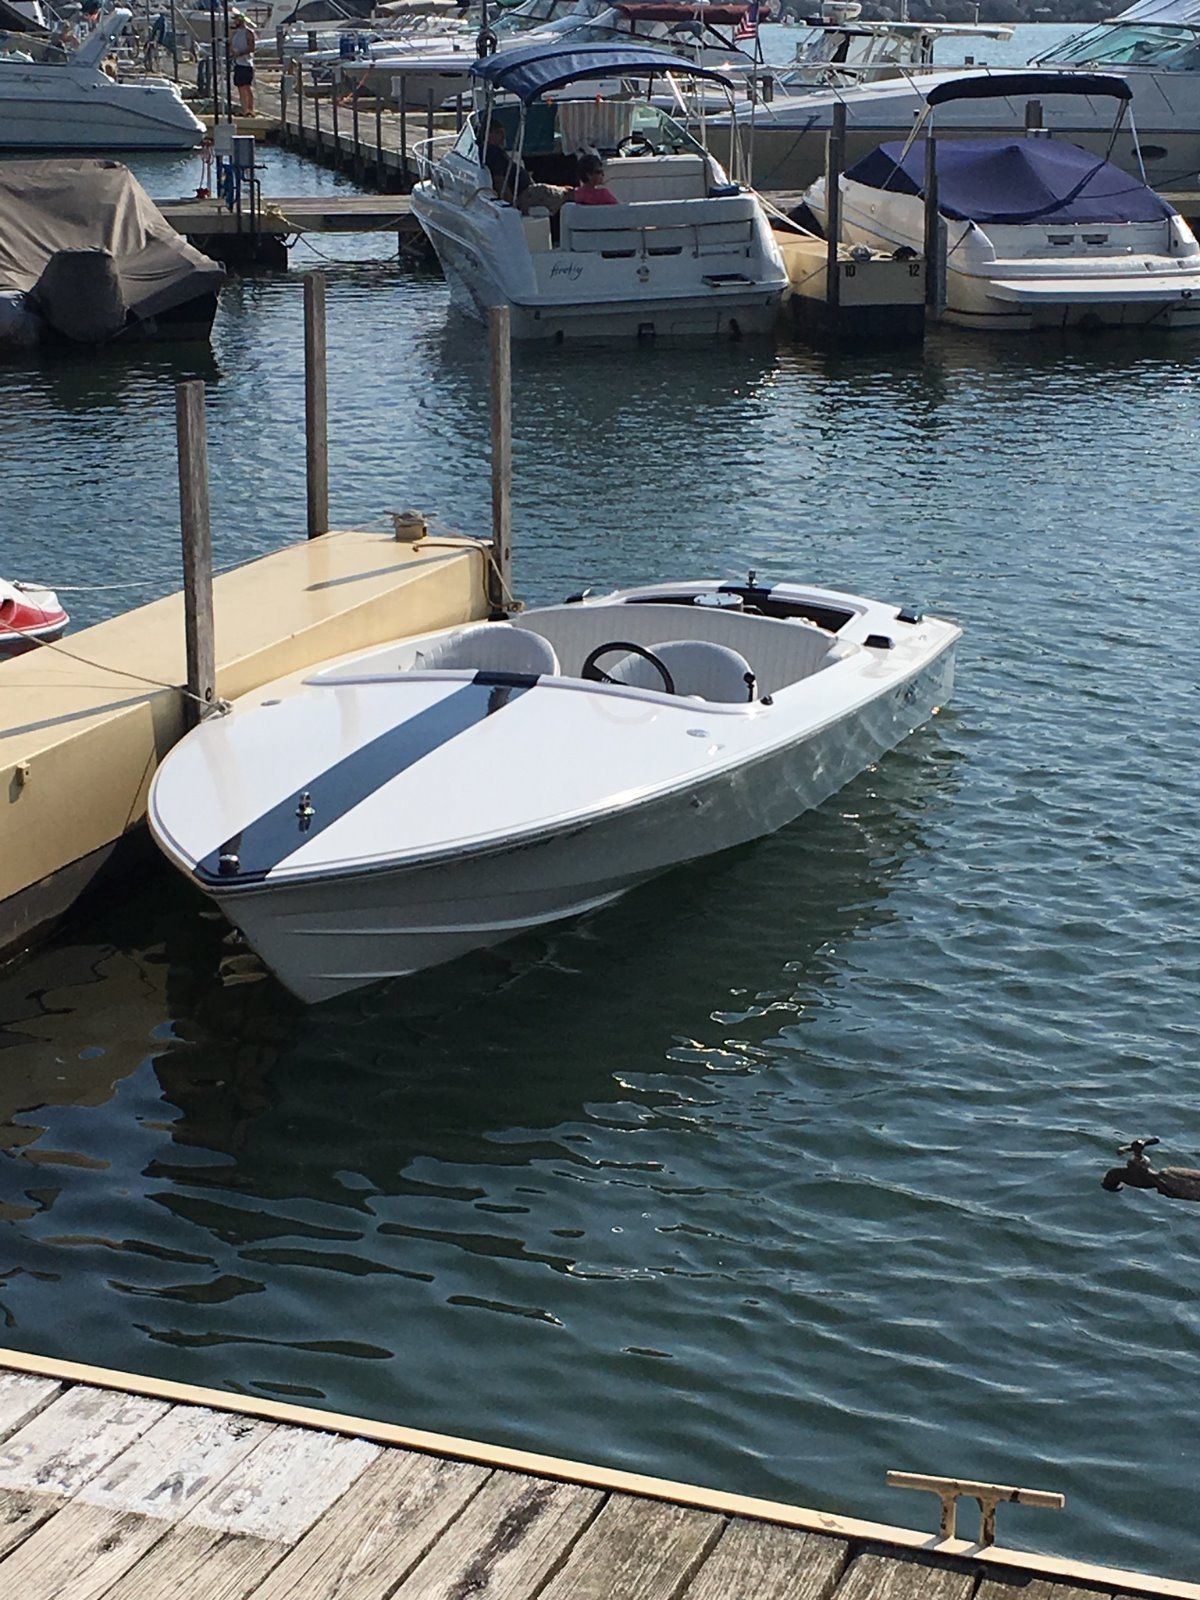 Donzi Classic 18 2Plus3 1971 for sale for $19,800 - Boats-from-USA.com